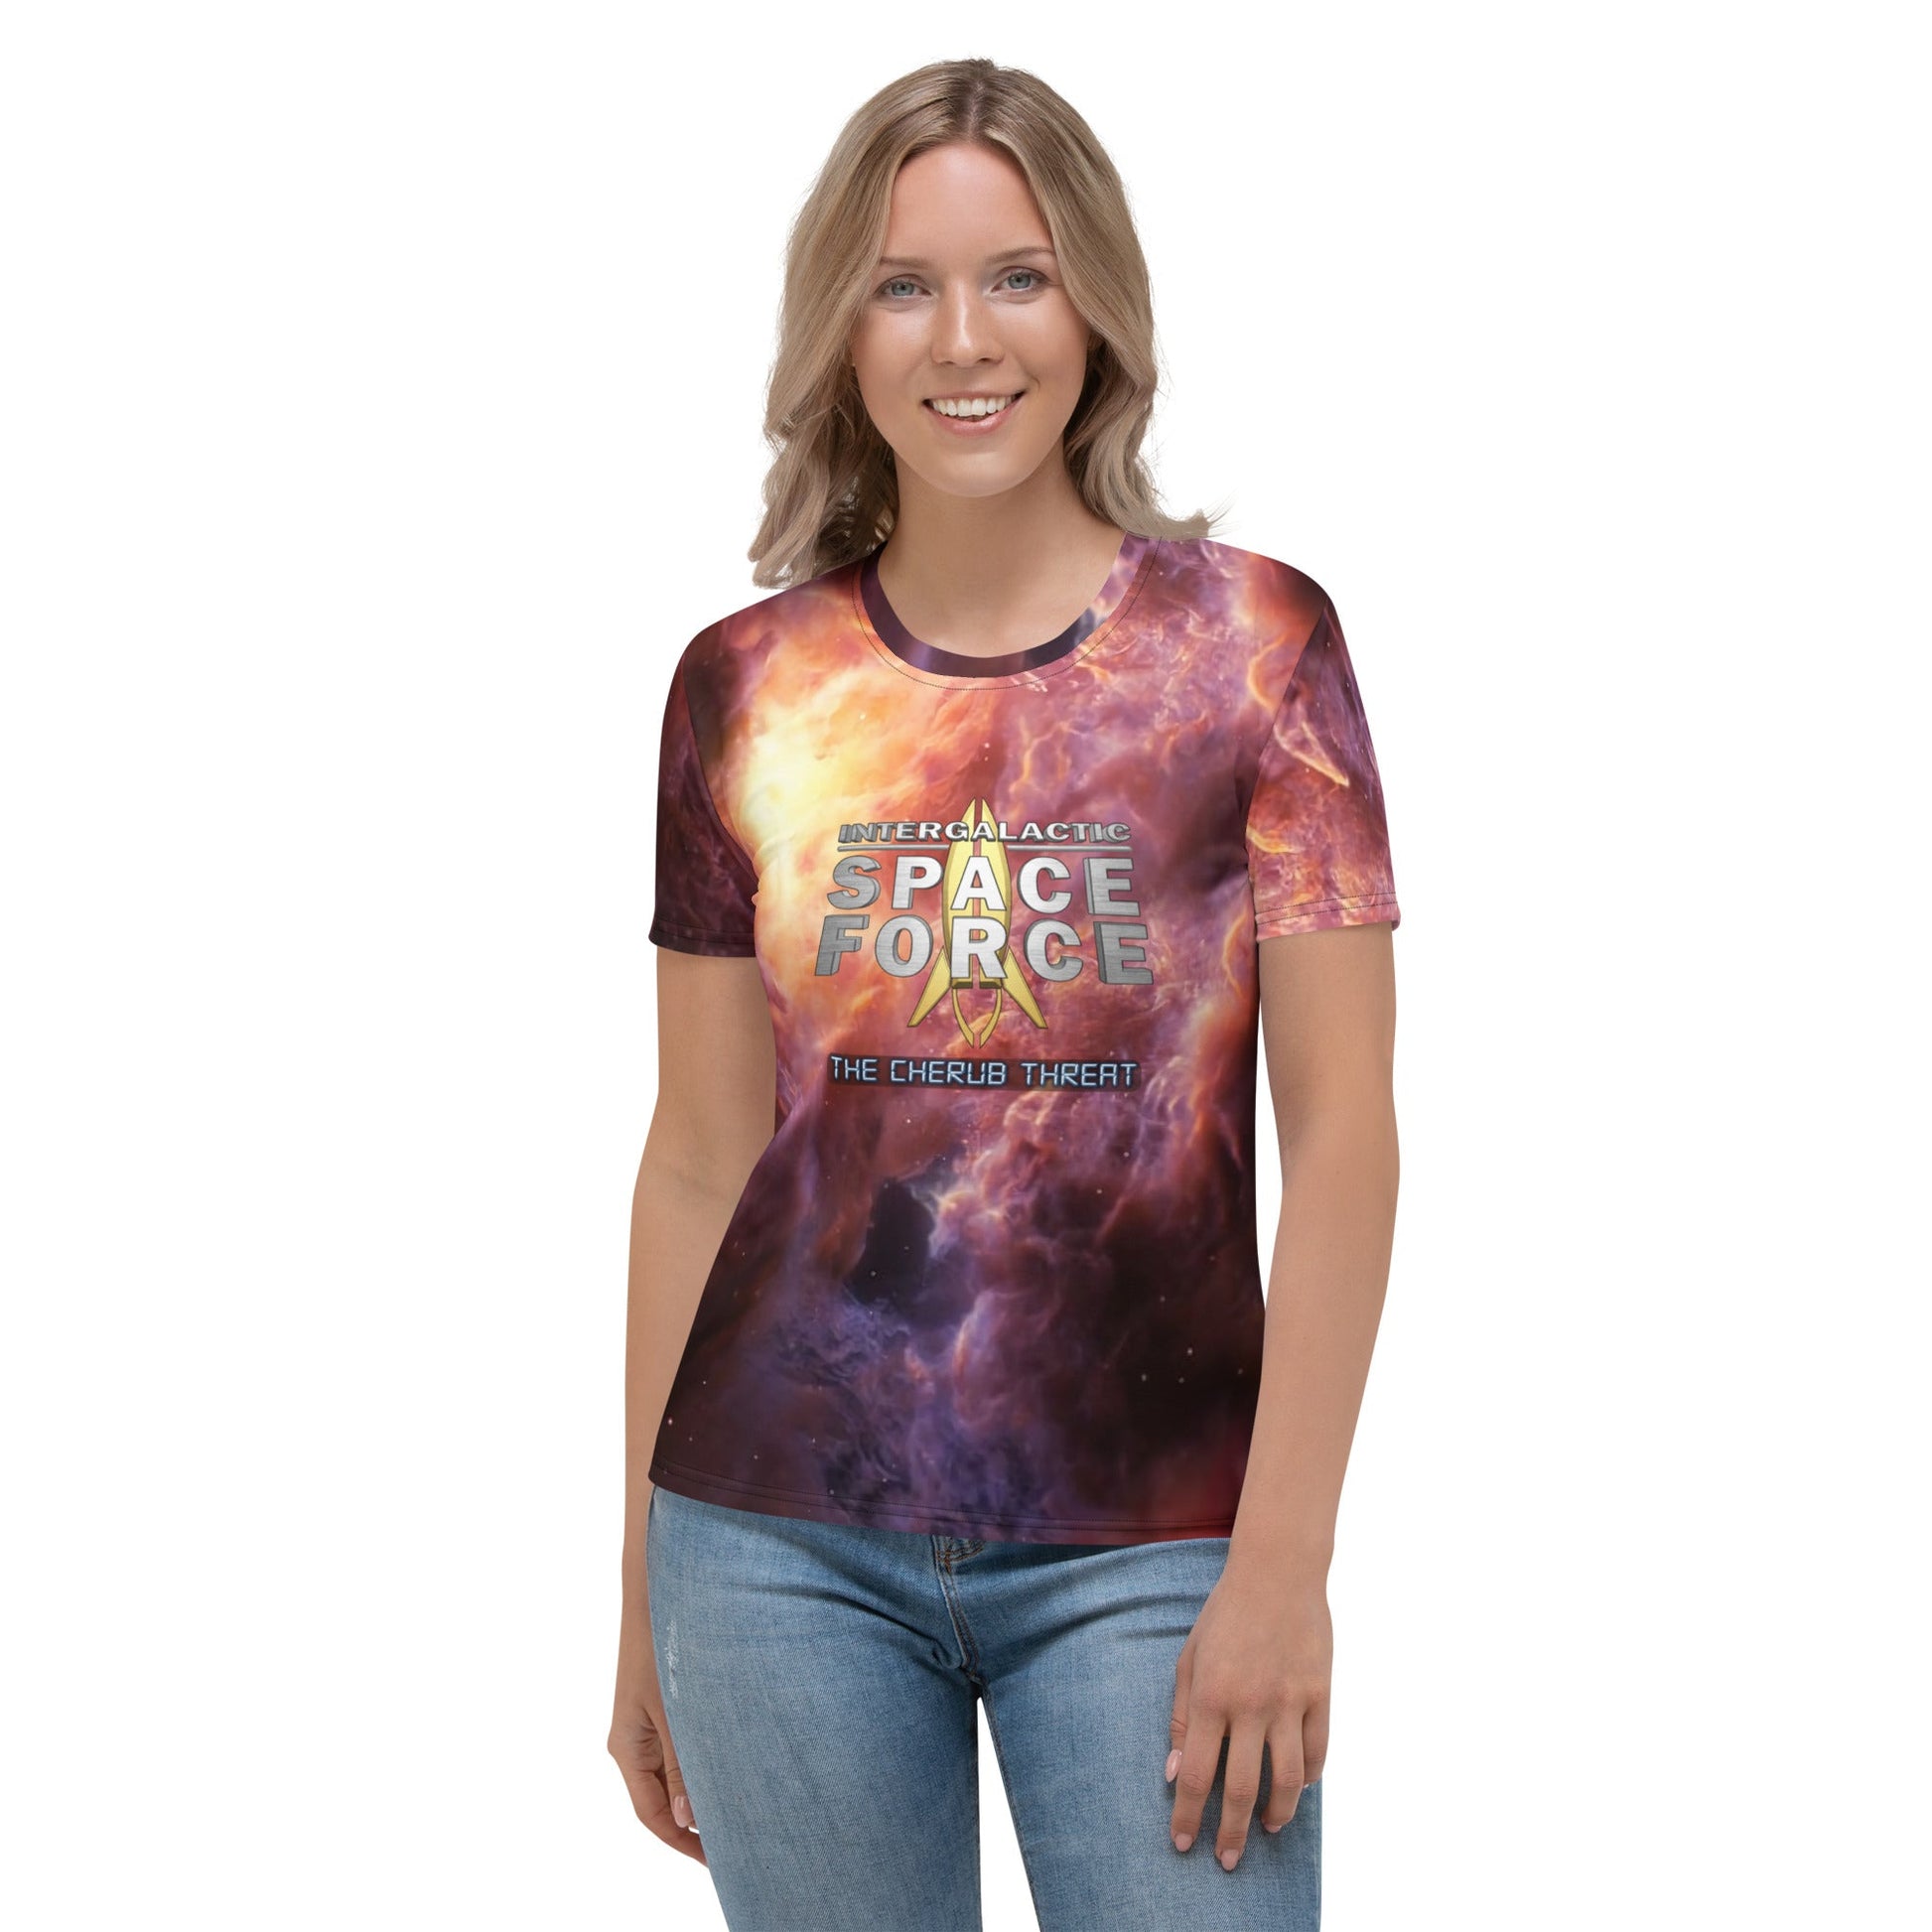 Women's All-Over Print T-shirt | Intergalactic Space Force | Nebula - Spectral Ink Shop - Shirts & Tops -6893719_8884